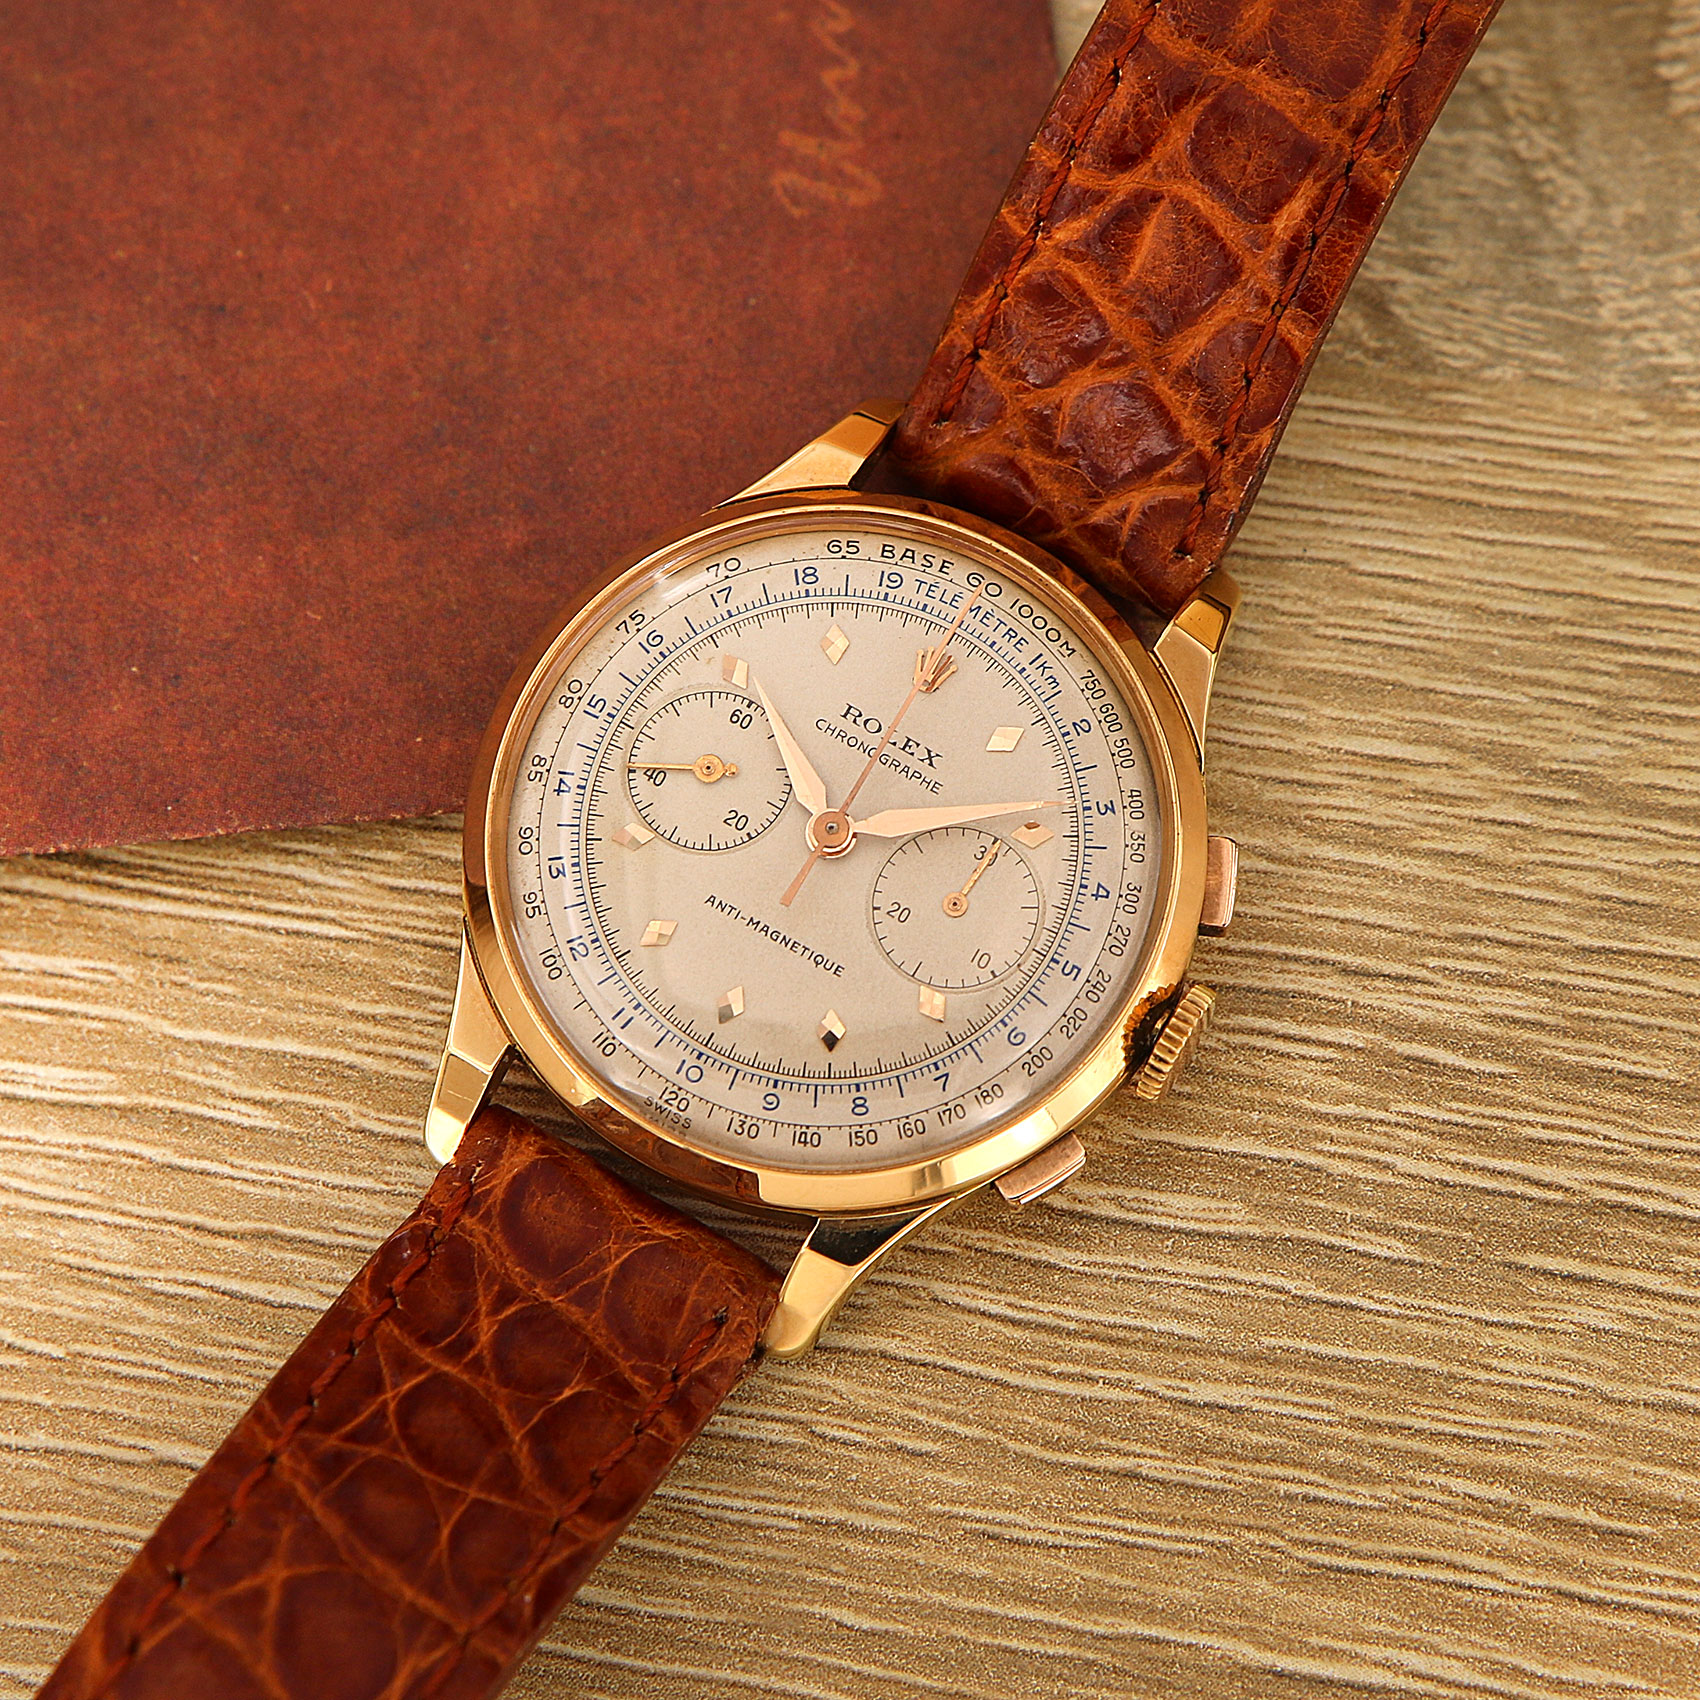 Rolex Vintage Chronograph ref. 3834 in 18k rose gold, made in the 40s